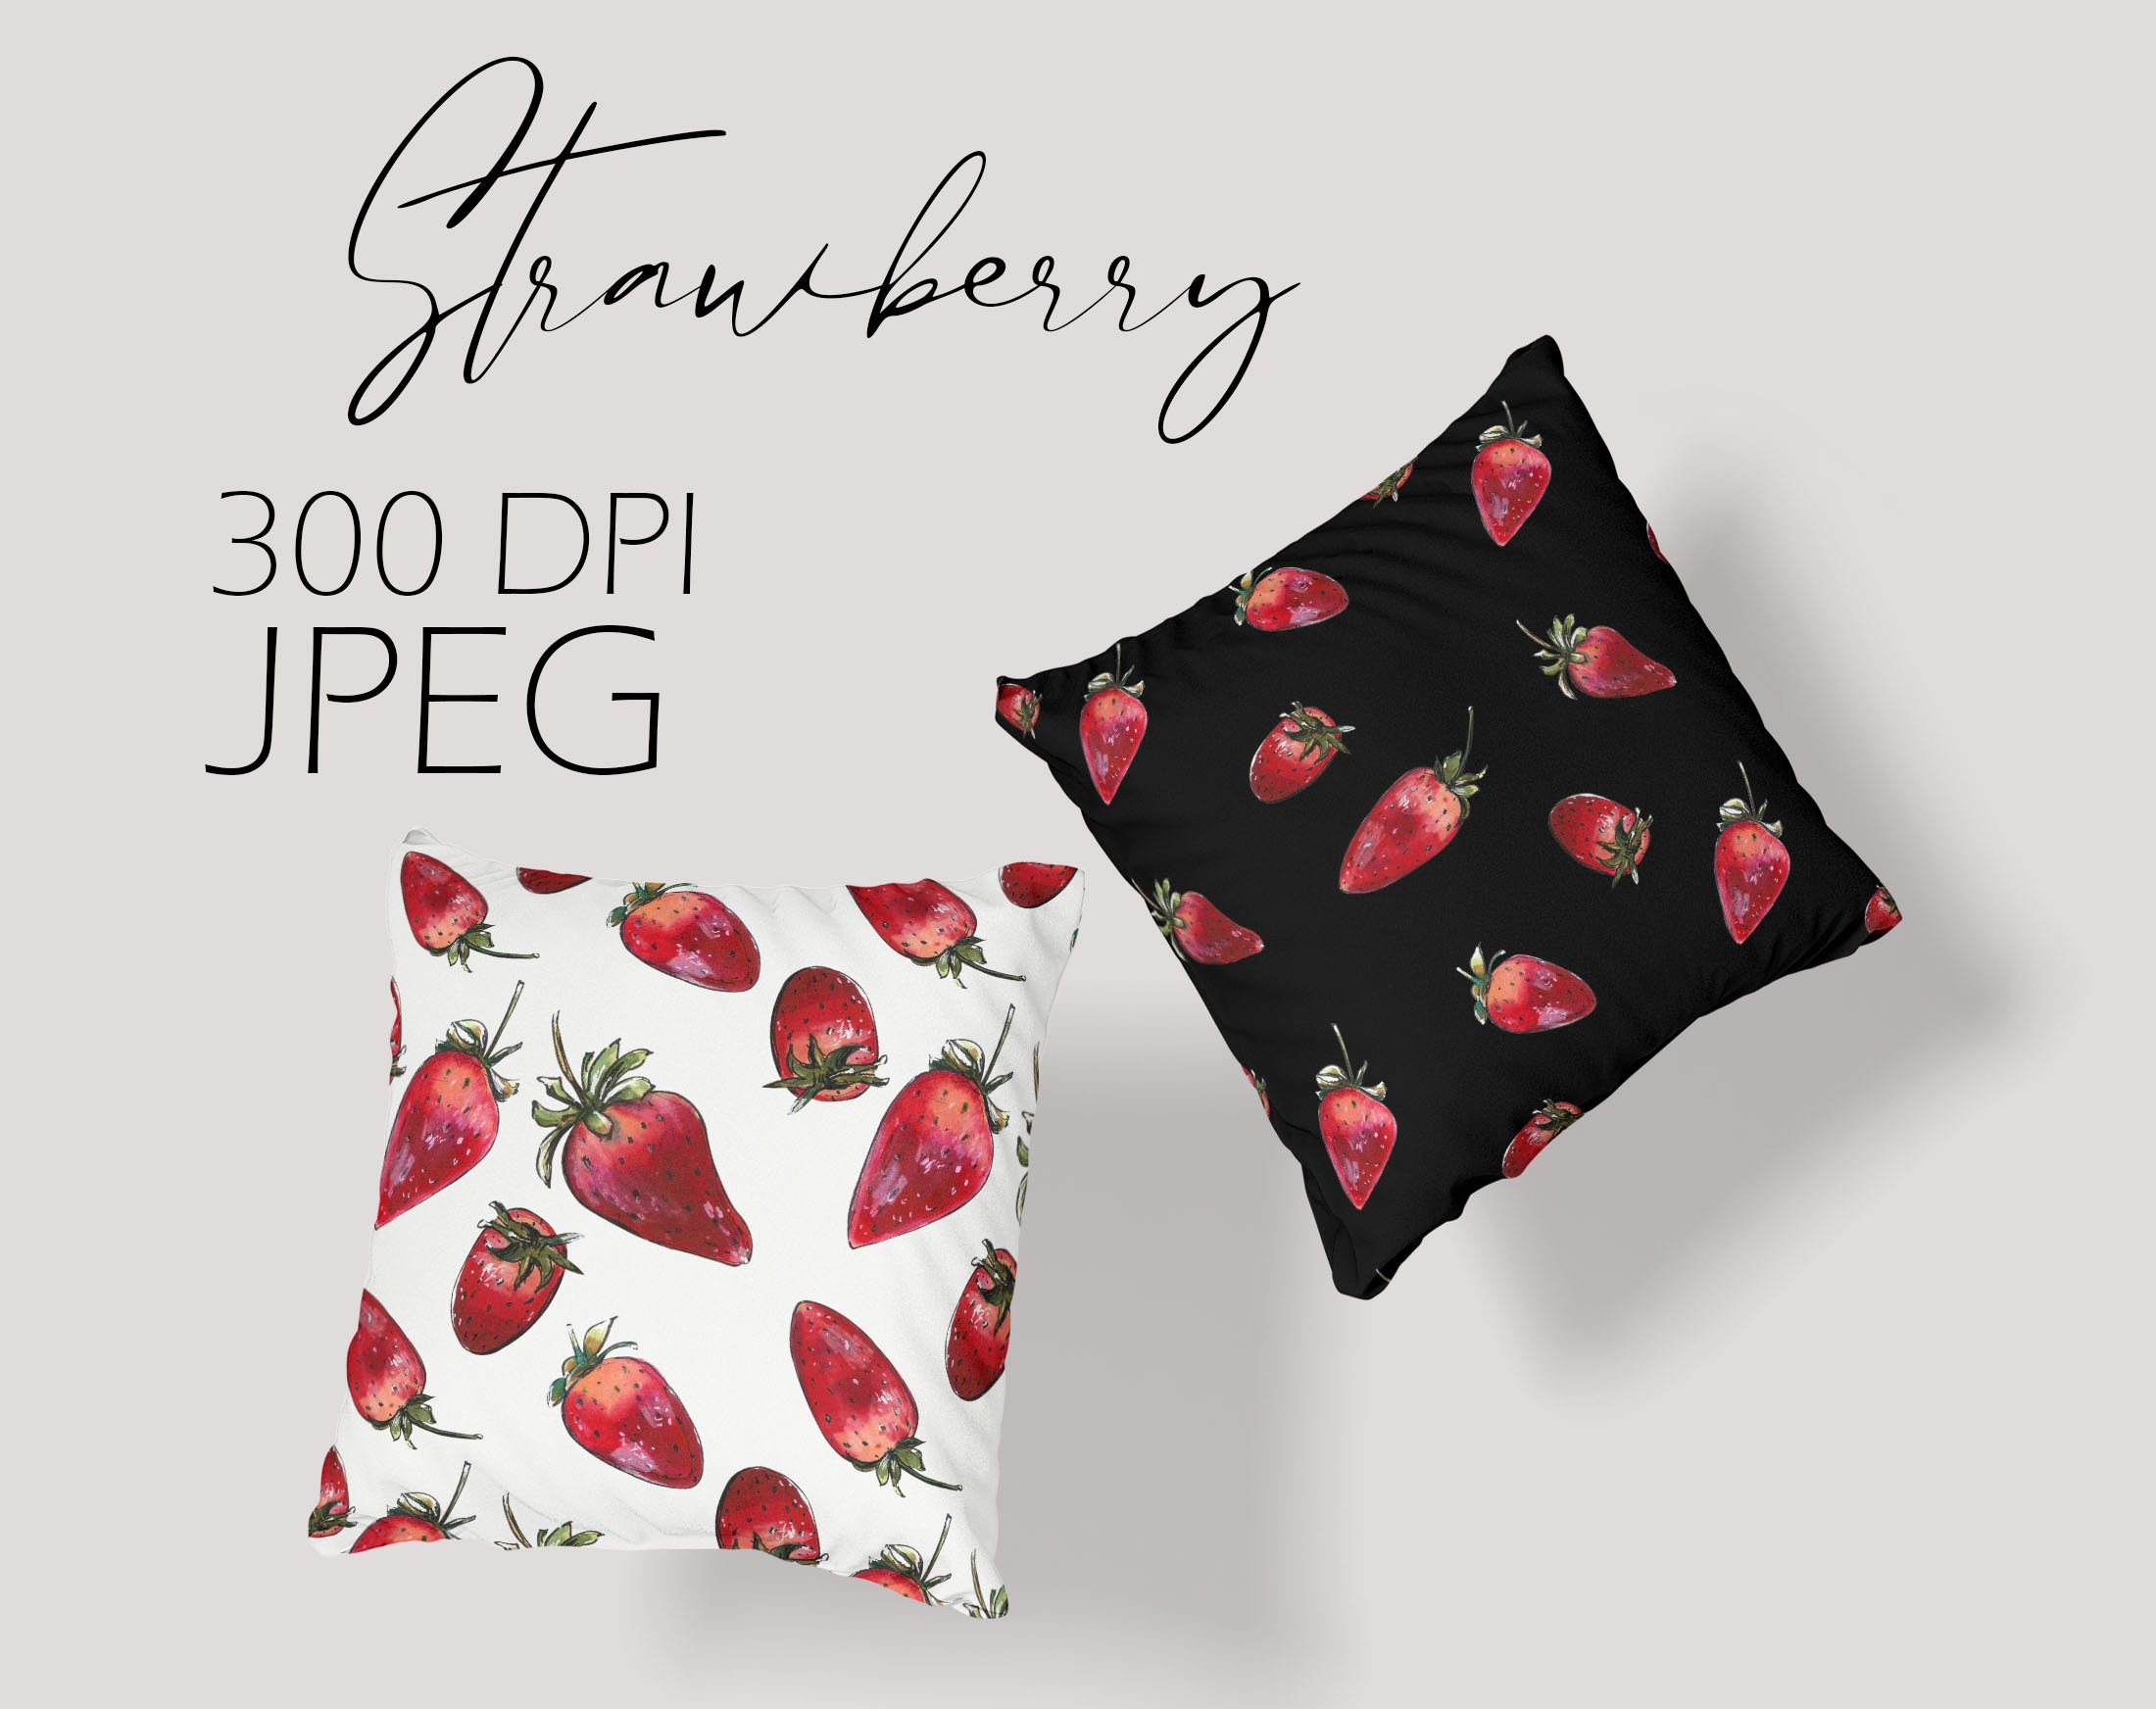 White pillow and black pillow with illustrations of a strawberries on a gray background.